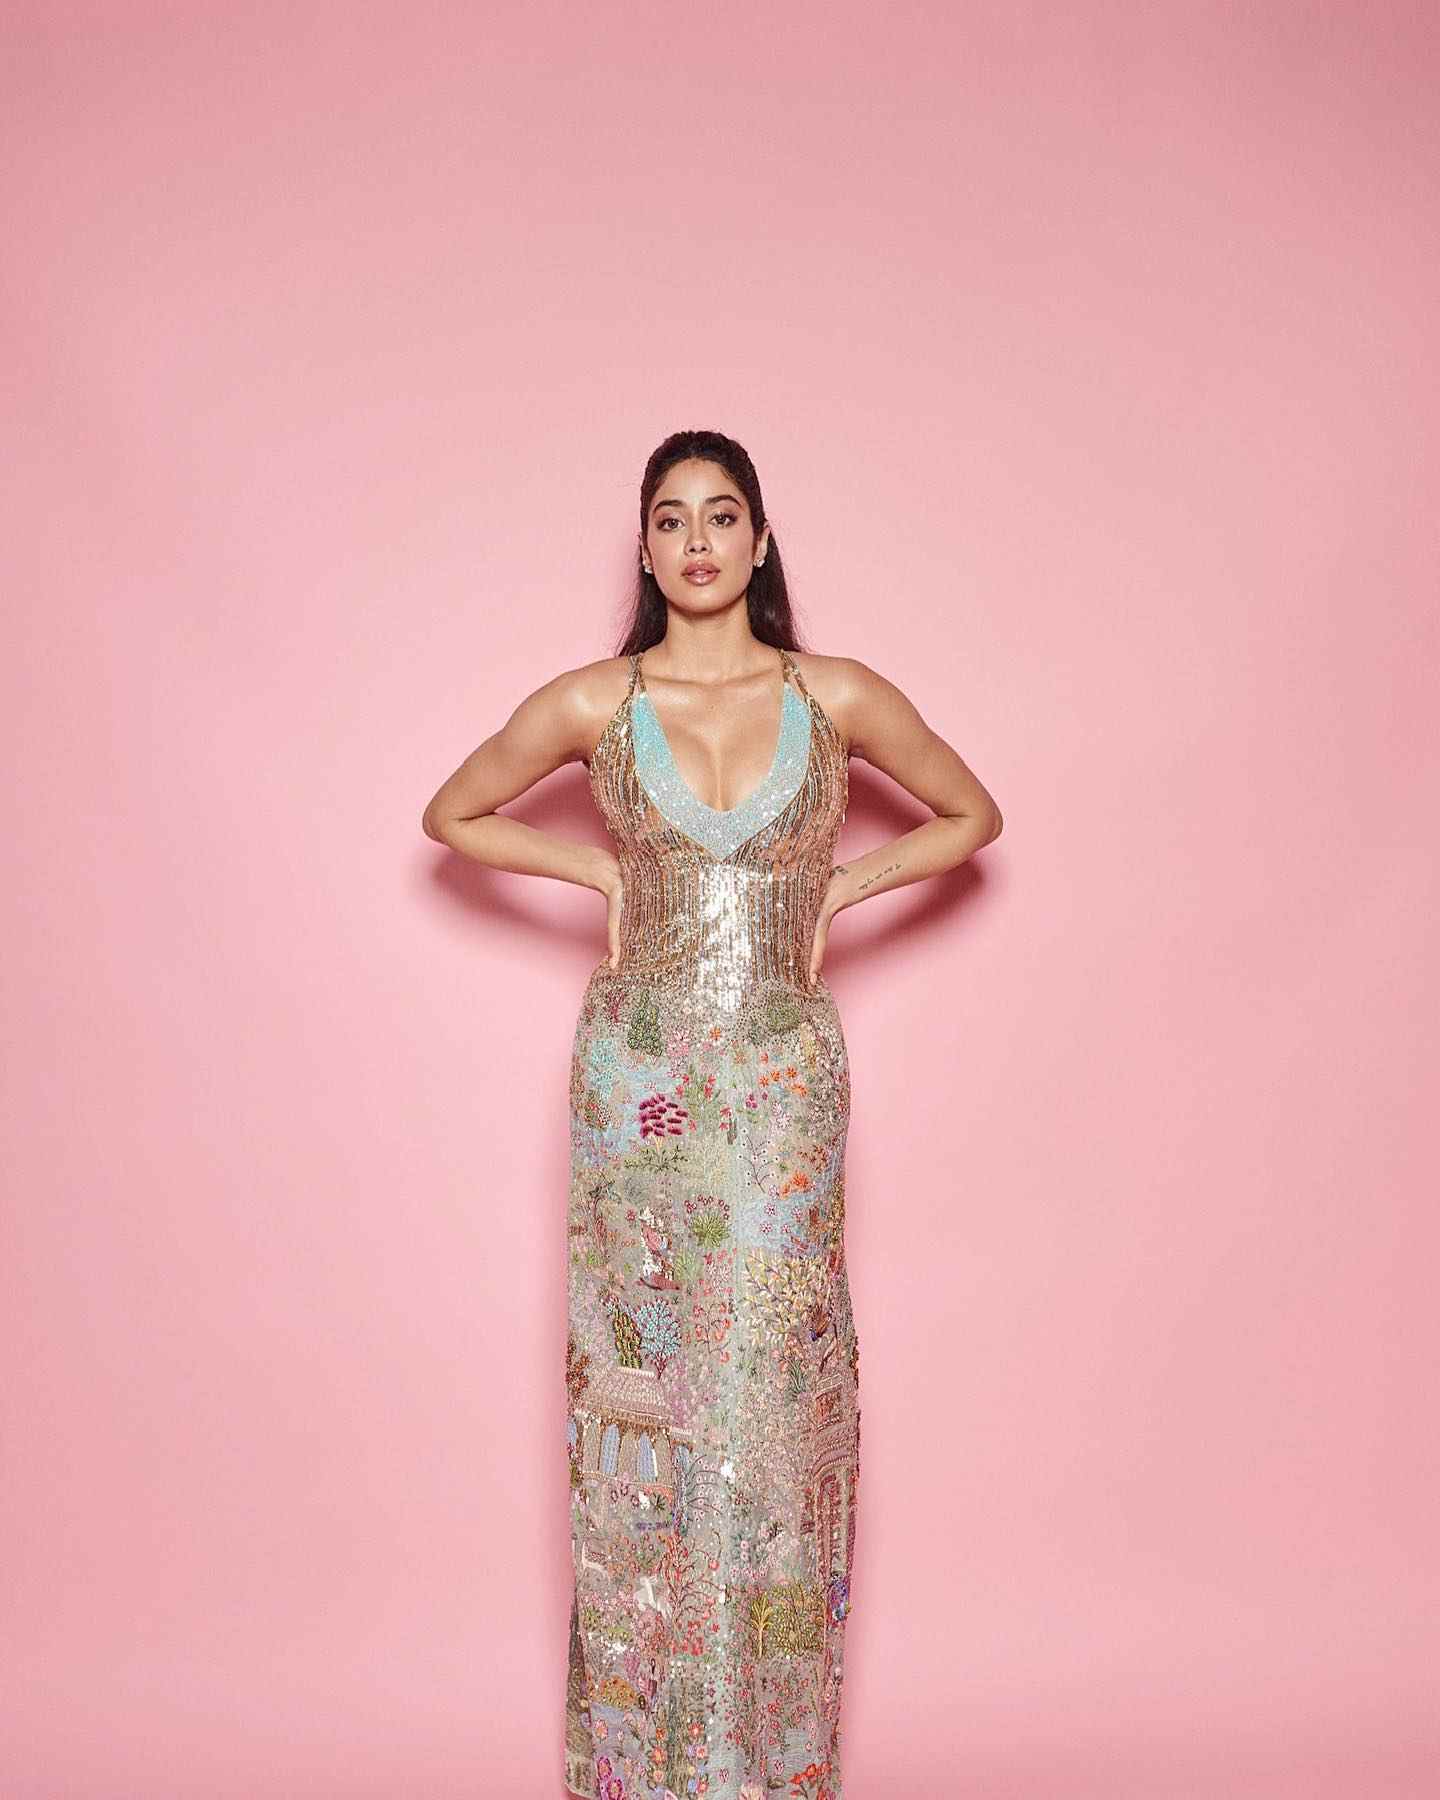 Janhvi Kapoor special photoshoot in Goodluck jerry promotions 